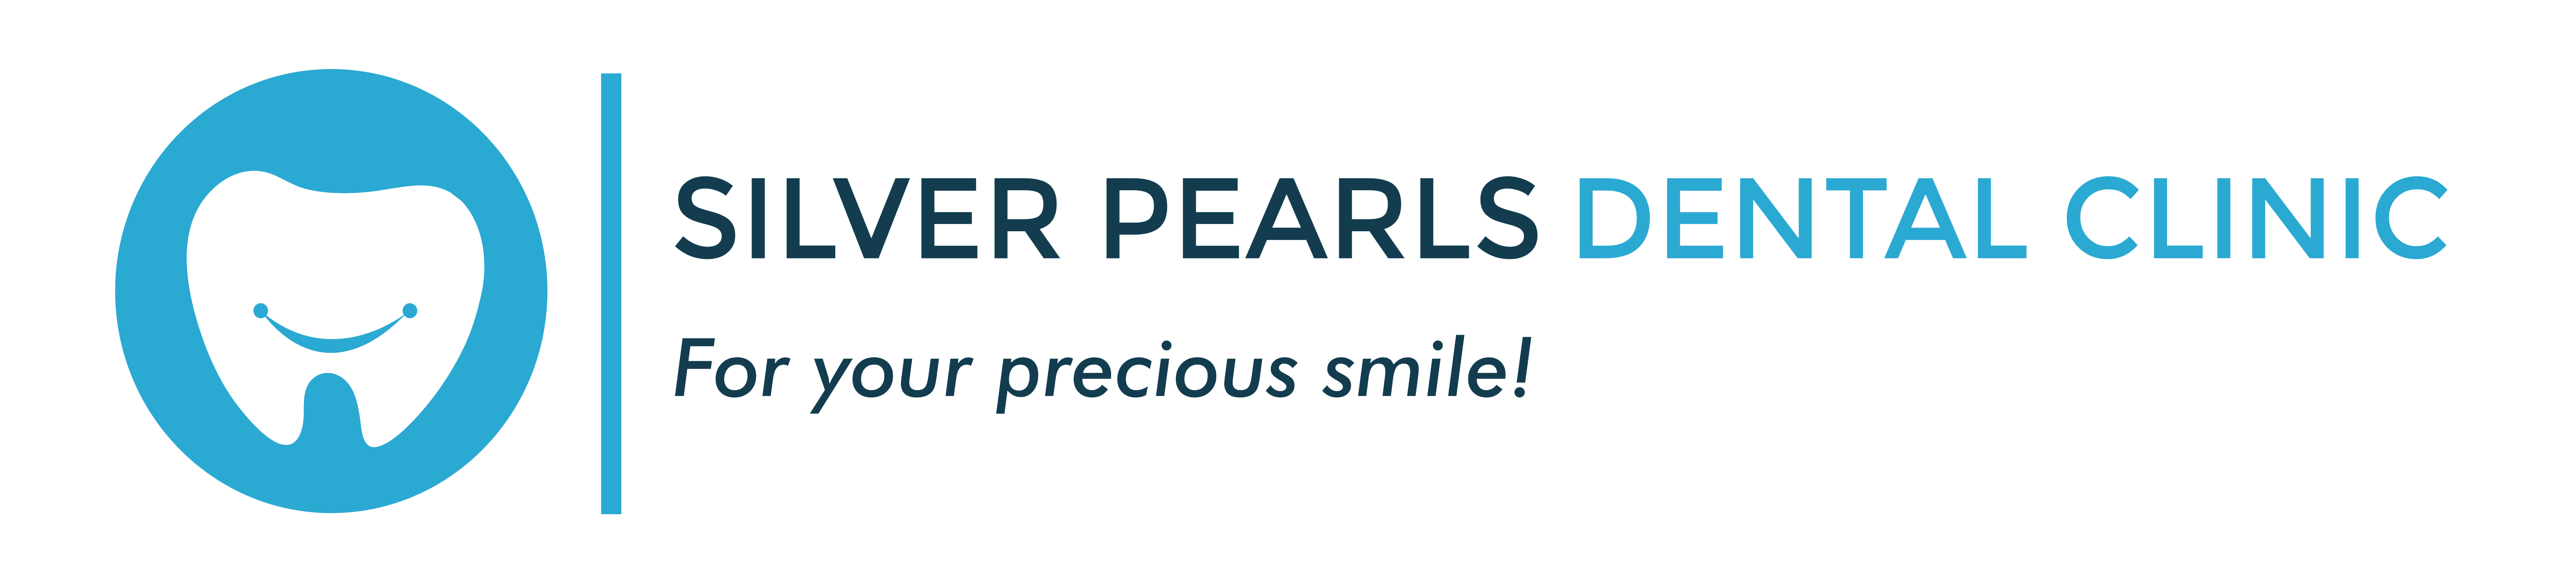 Best dentist in Kothrud, Silver Pearls Dental Clinic prvides all types of dental treatments at very affordable rates